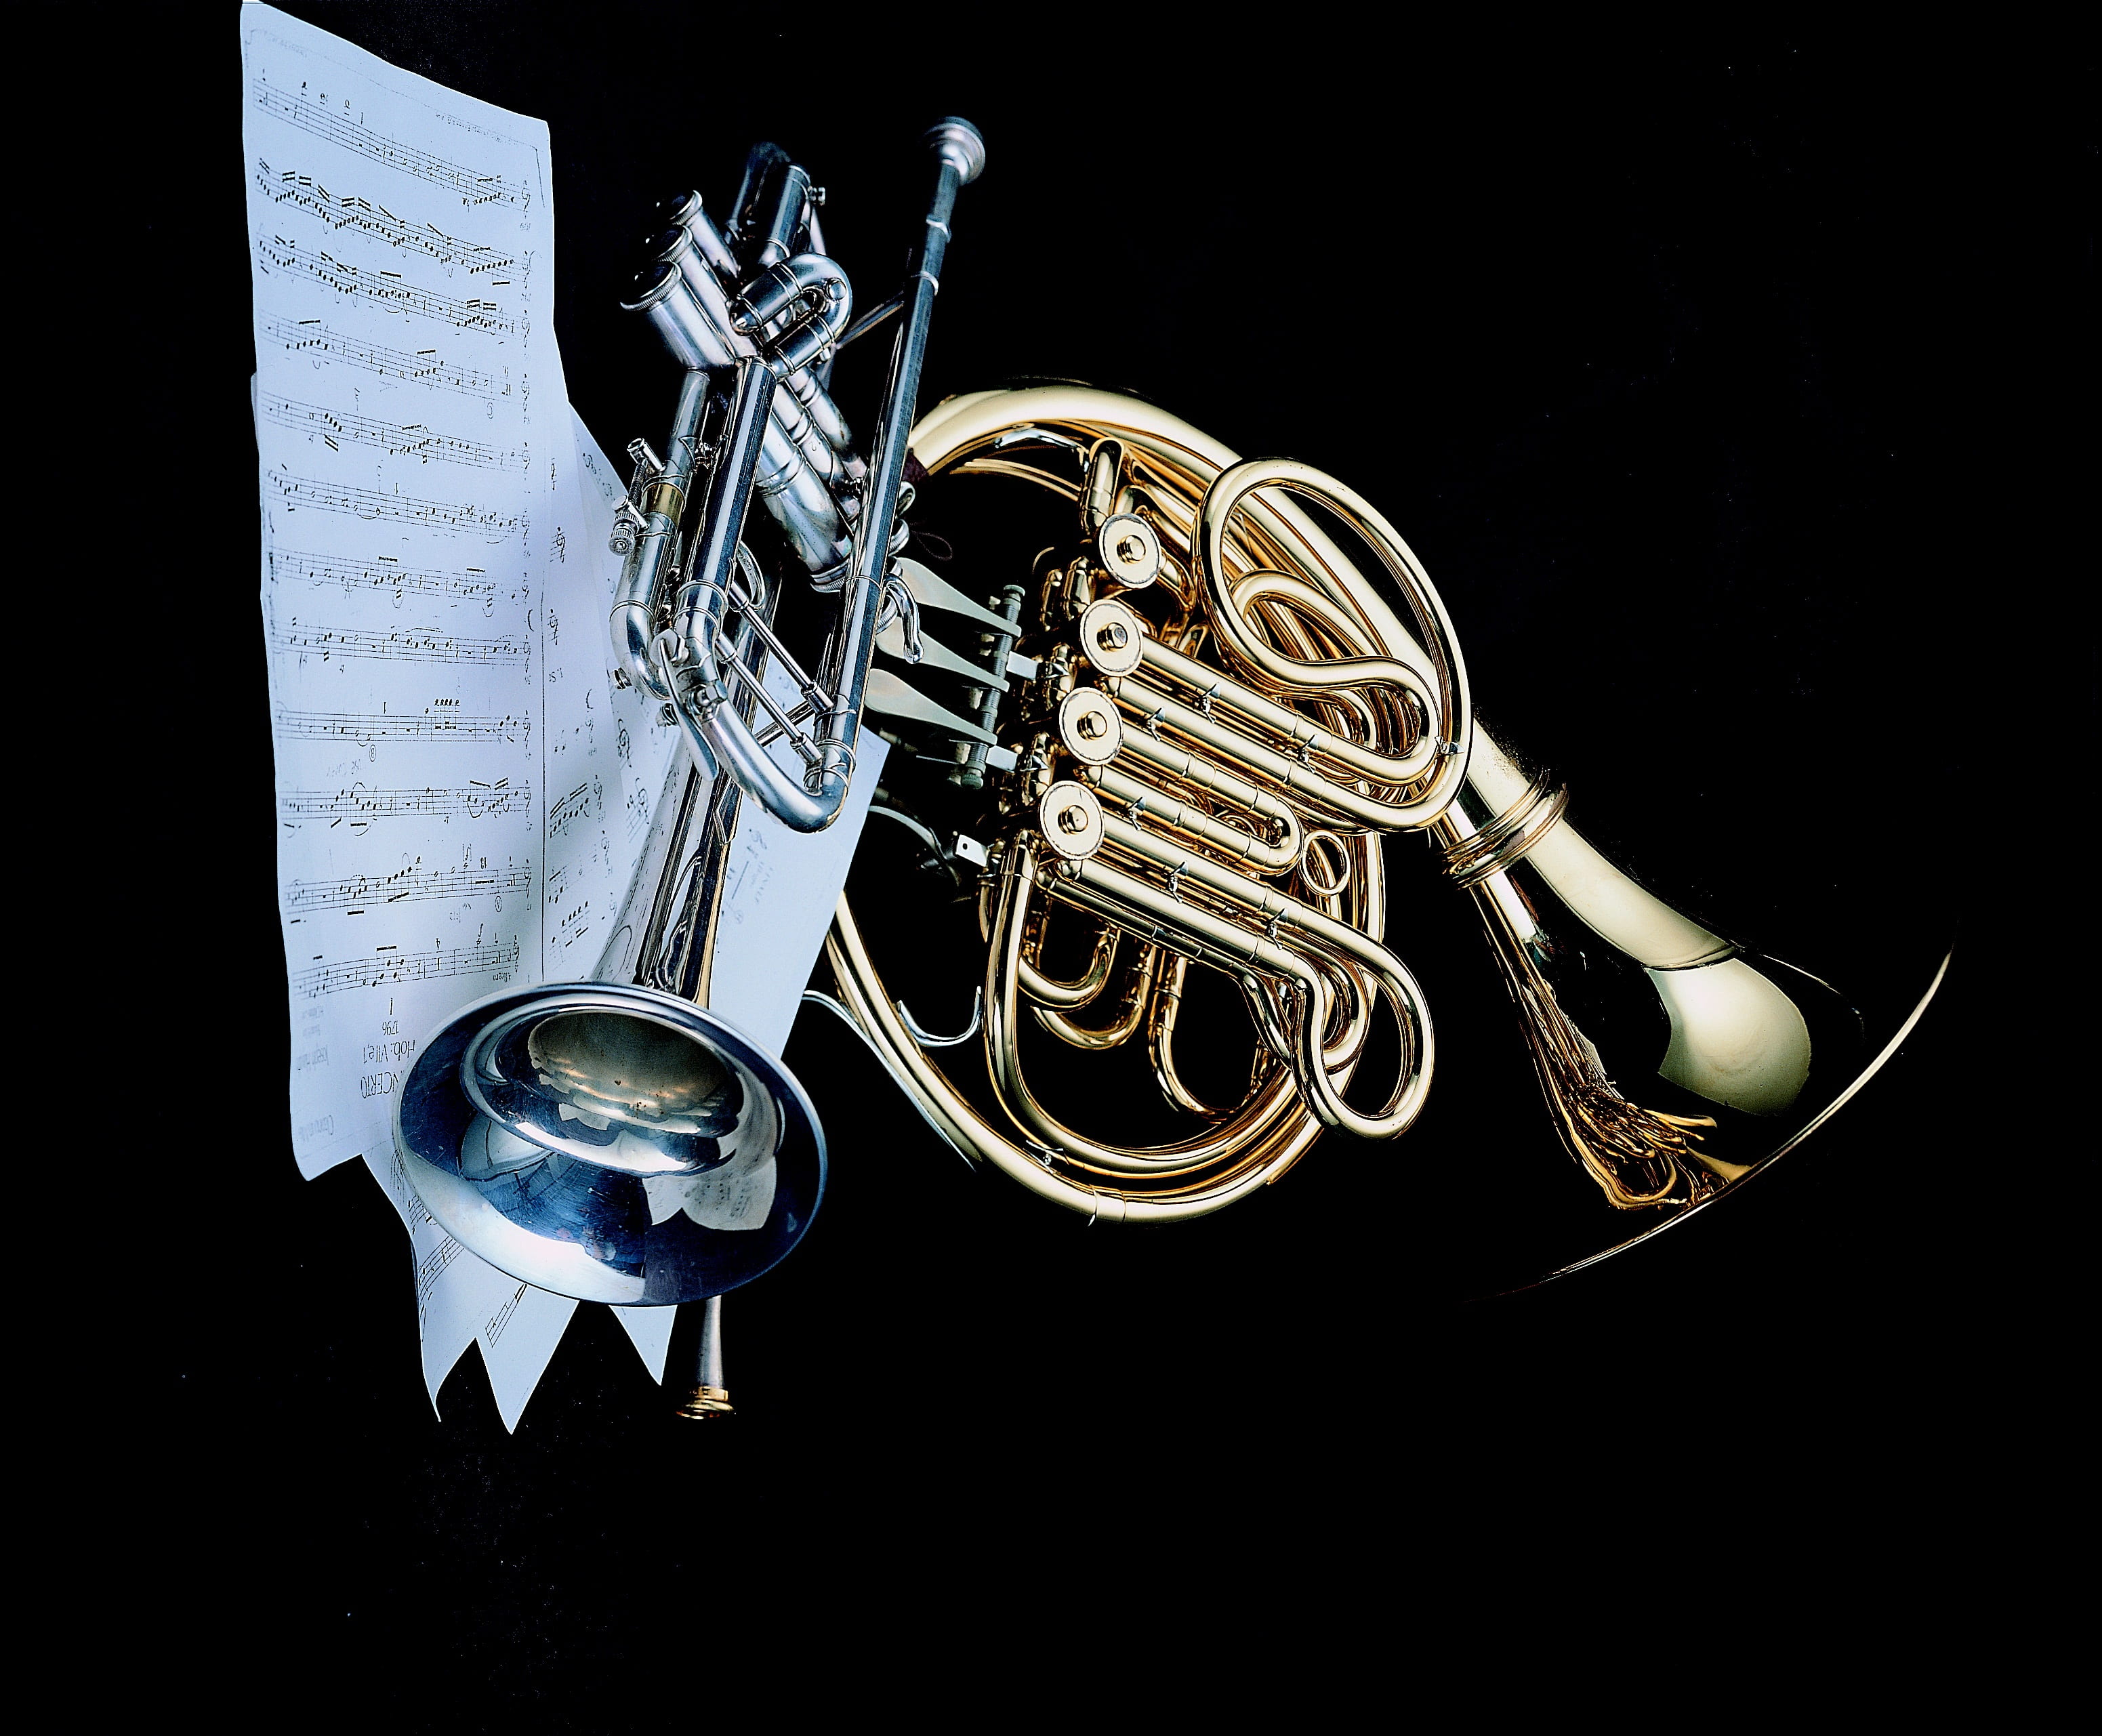 gray trumpet, small speakers, french hao, music sheet music, musical instrument